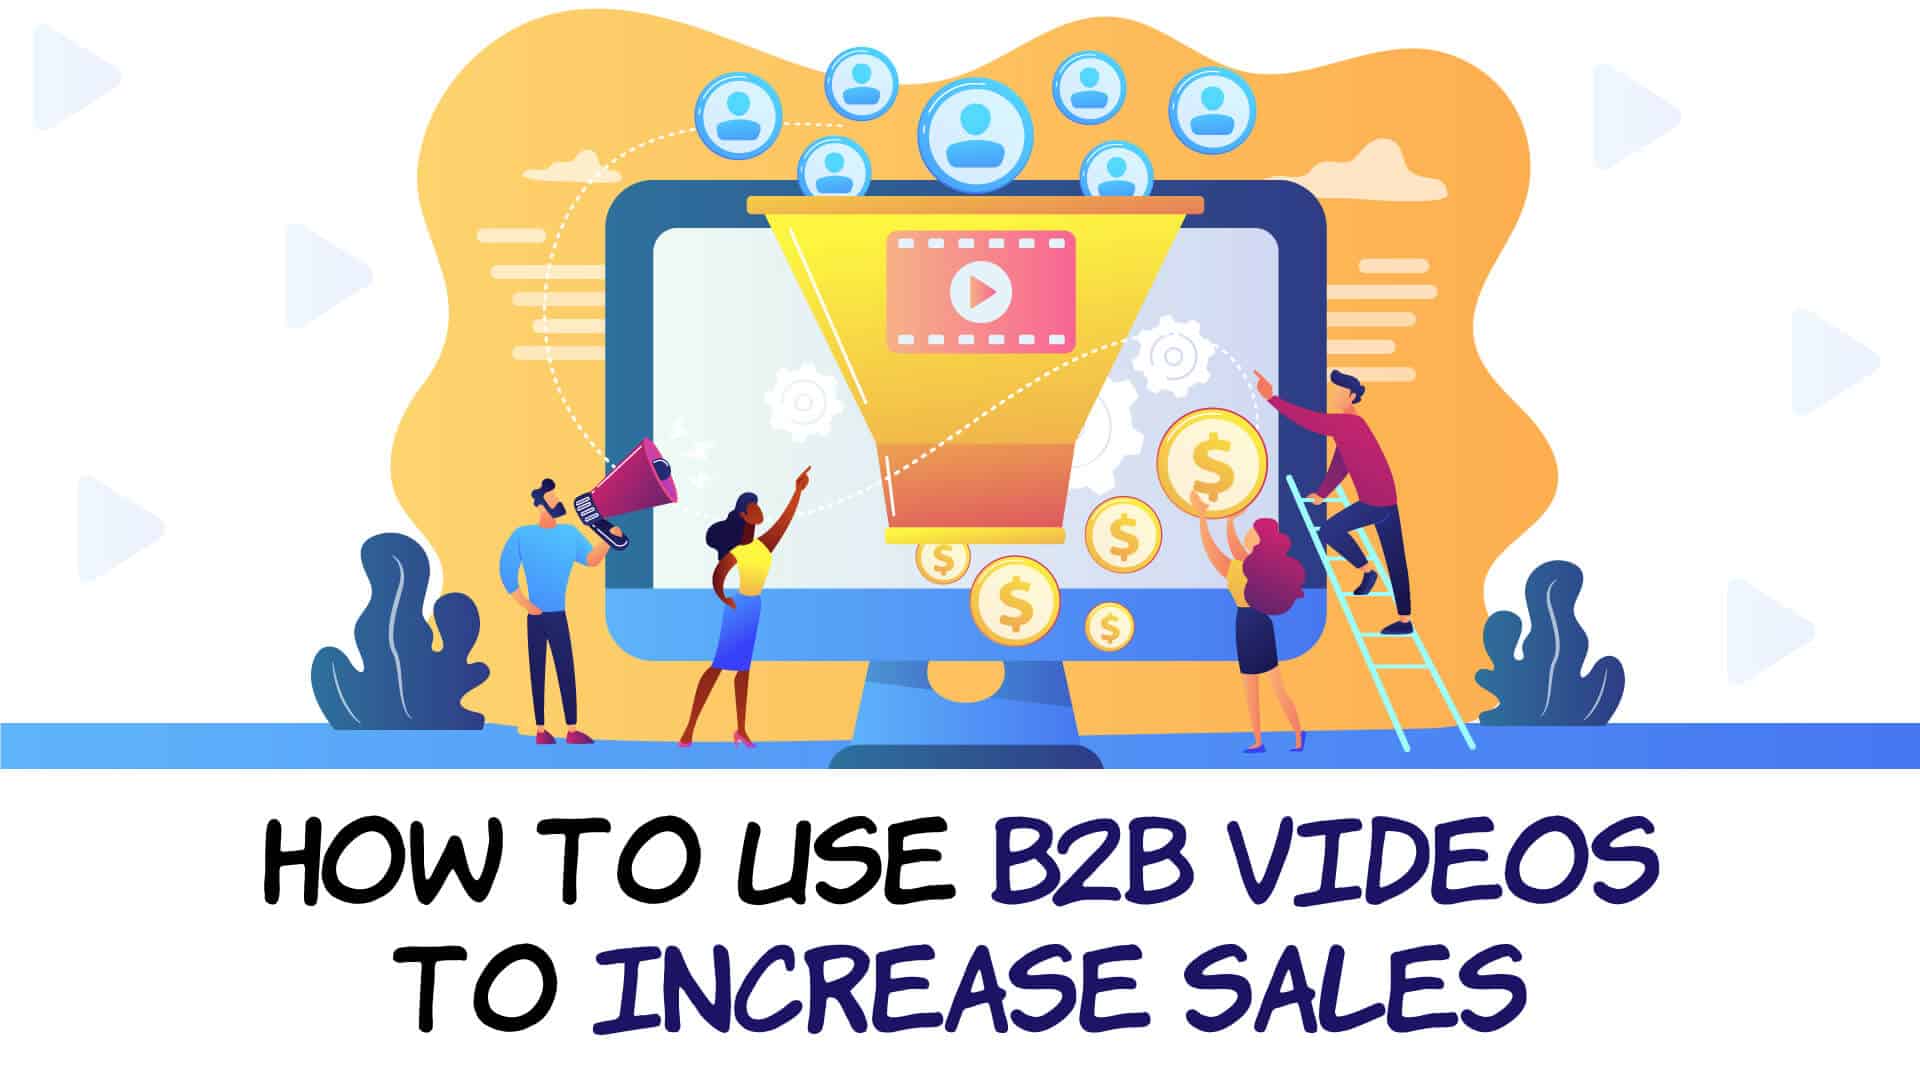 How to use B2B videos to increase sales